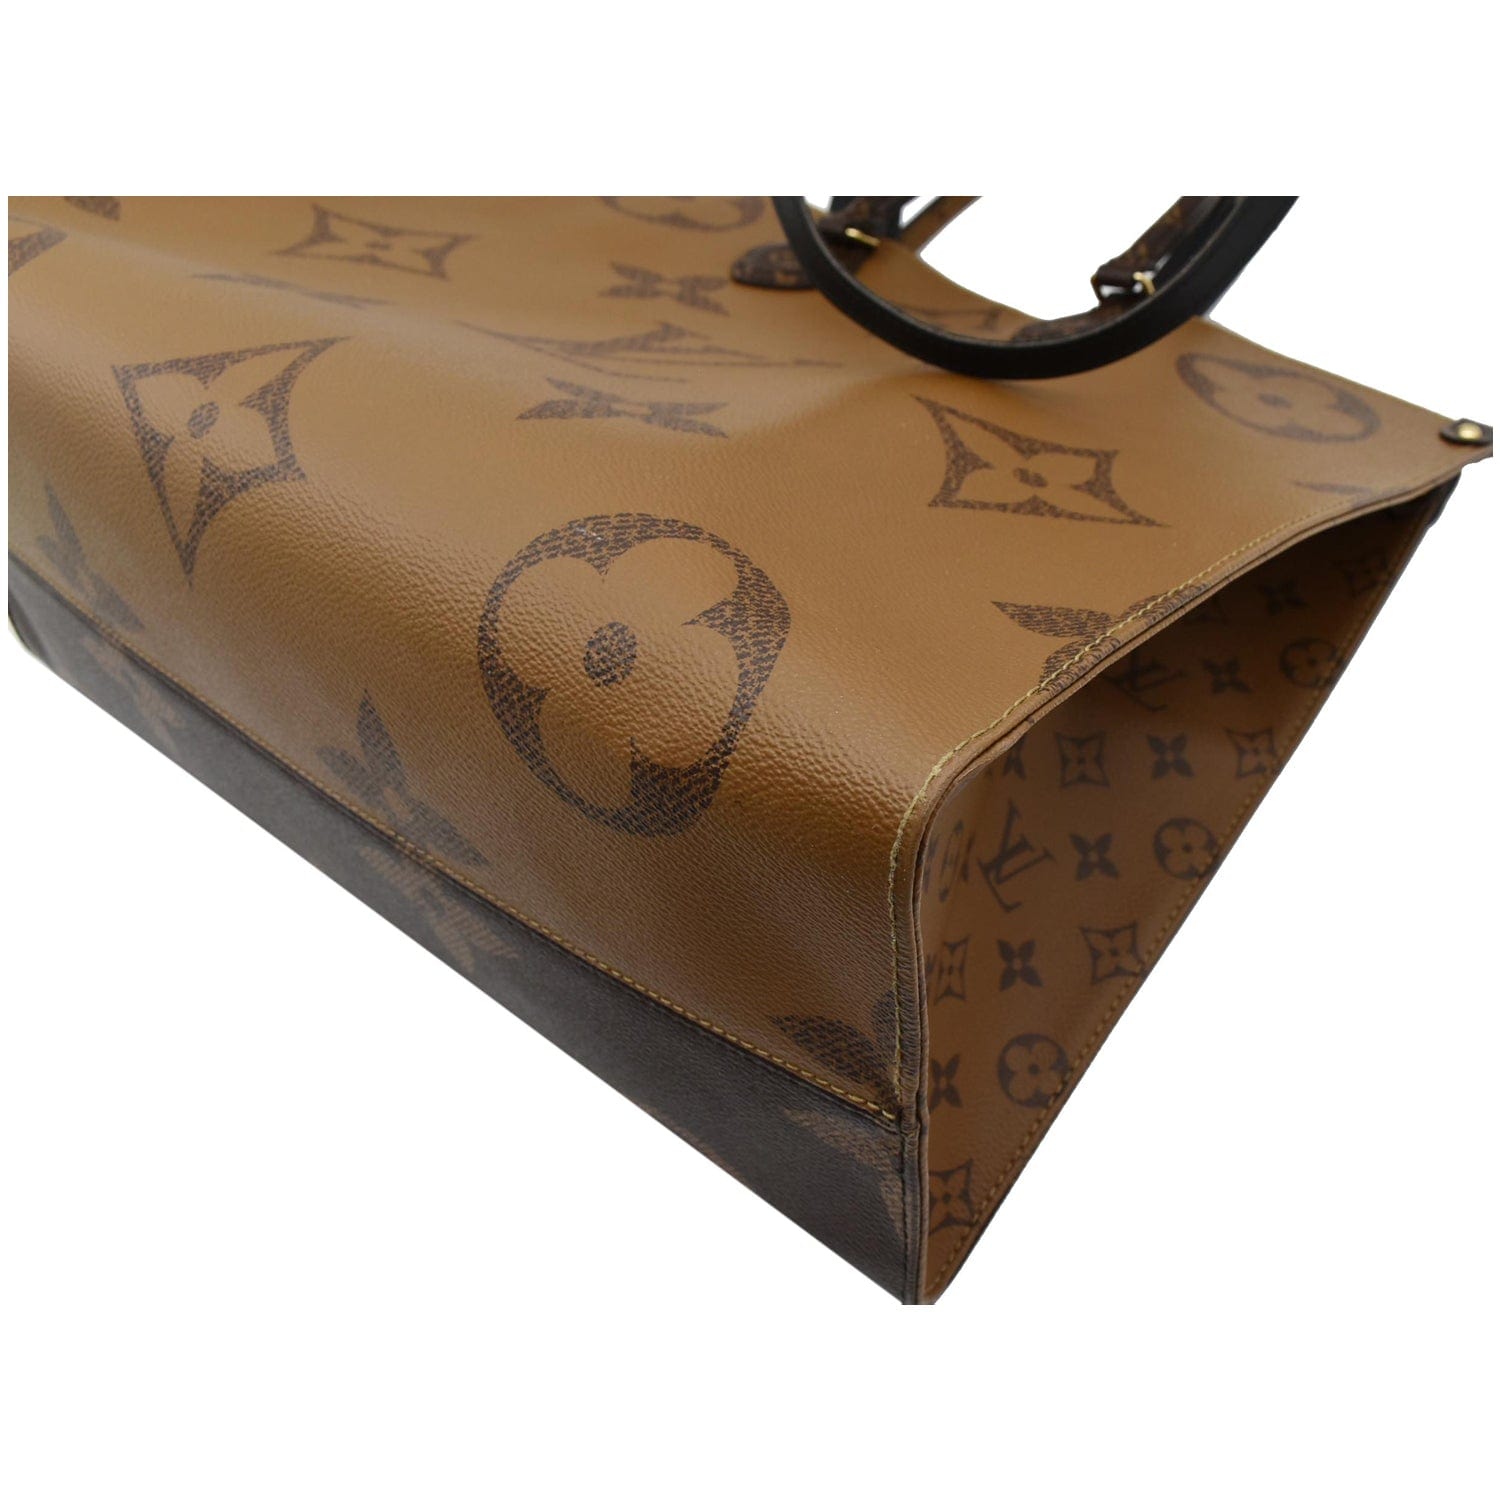 Louis Vuitton On-The-Go GM(Brown)